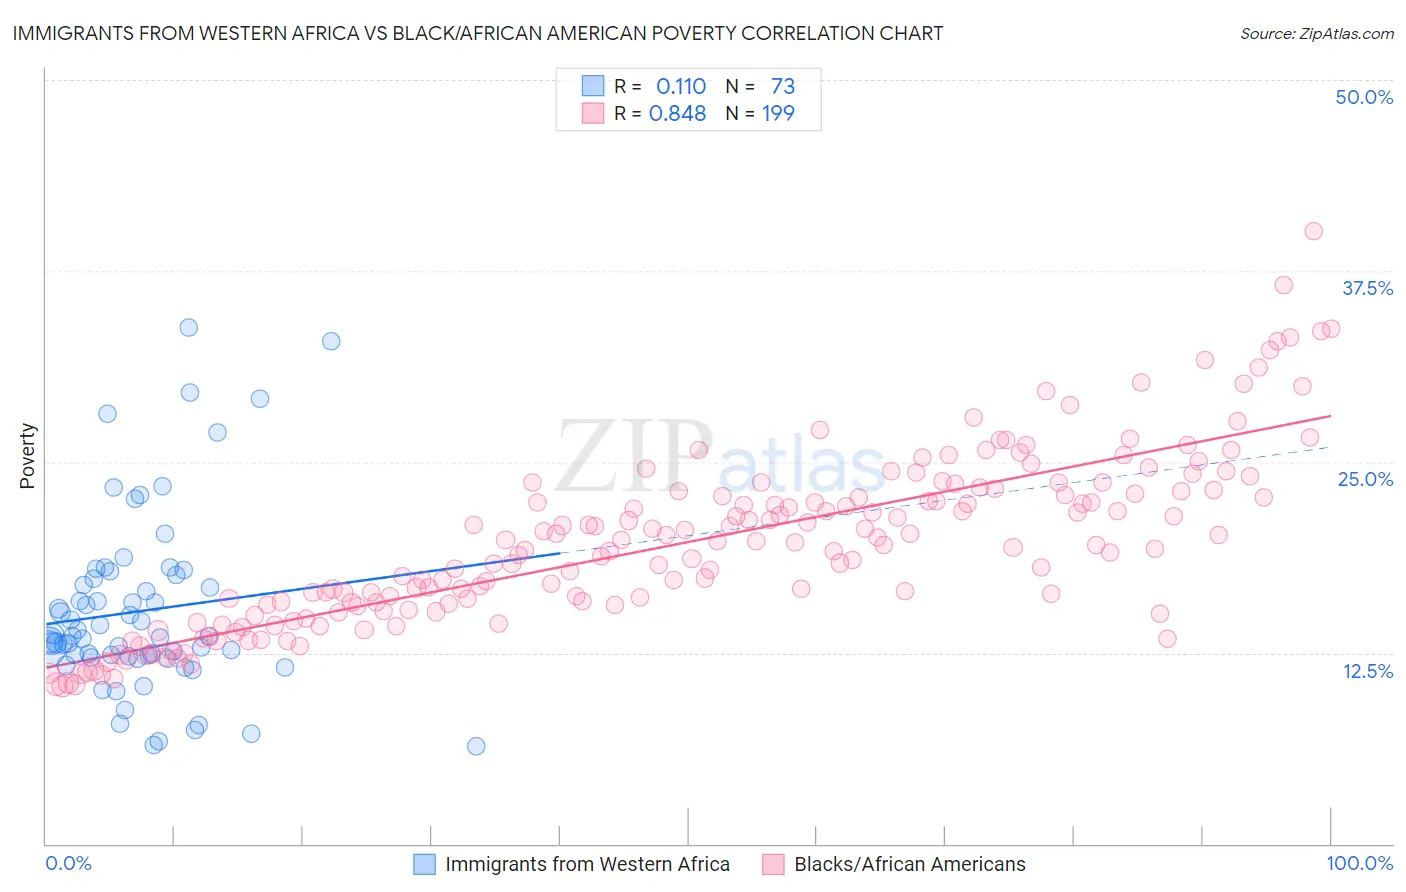 Immigrants from Western Africa vs Black/African American Poverty